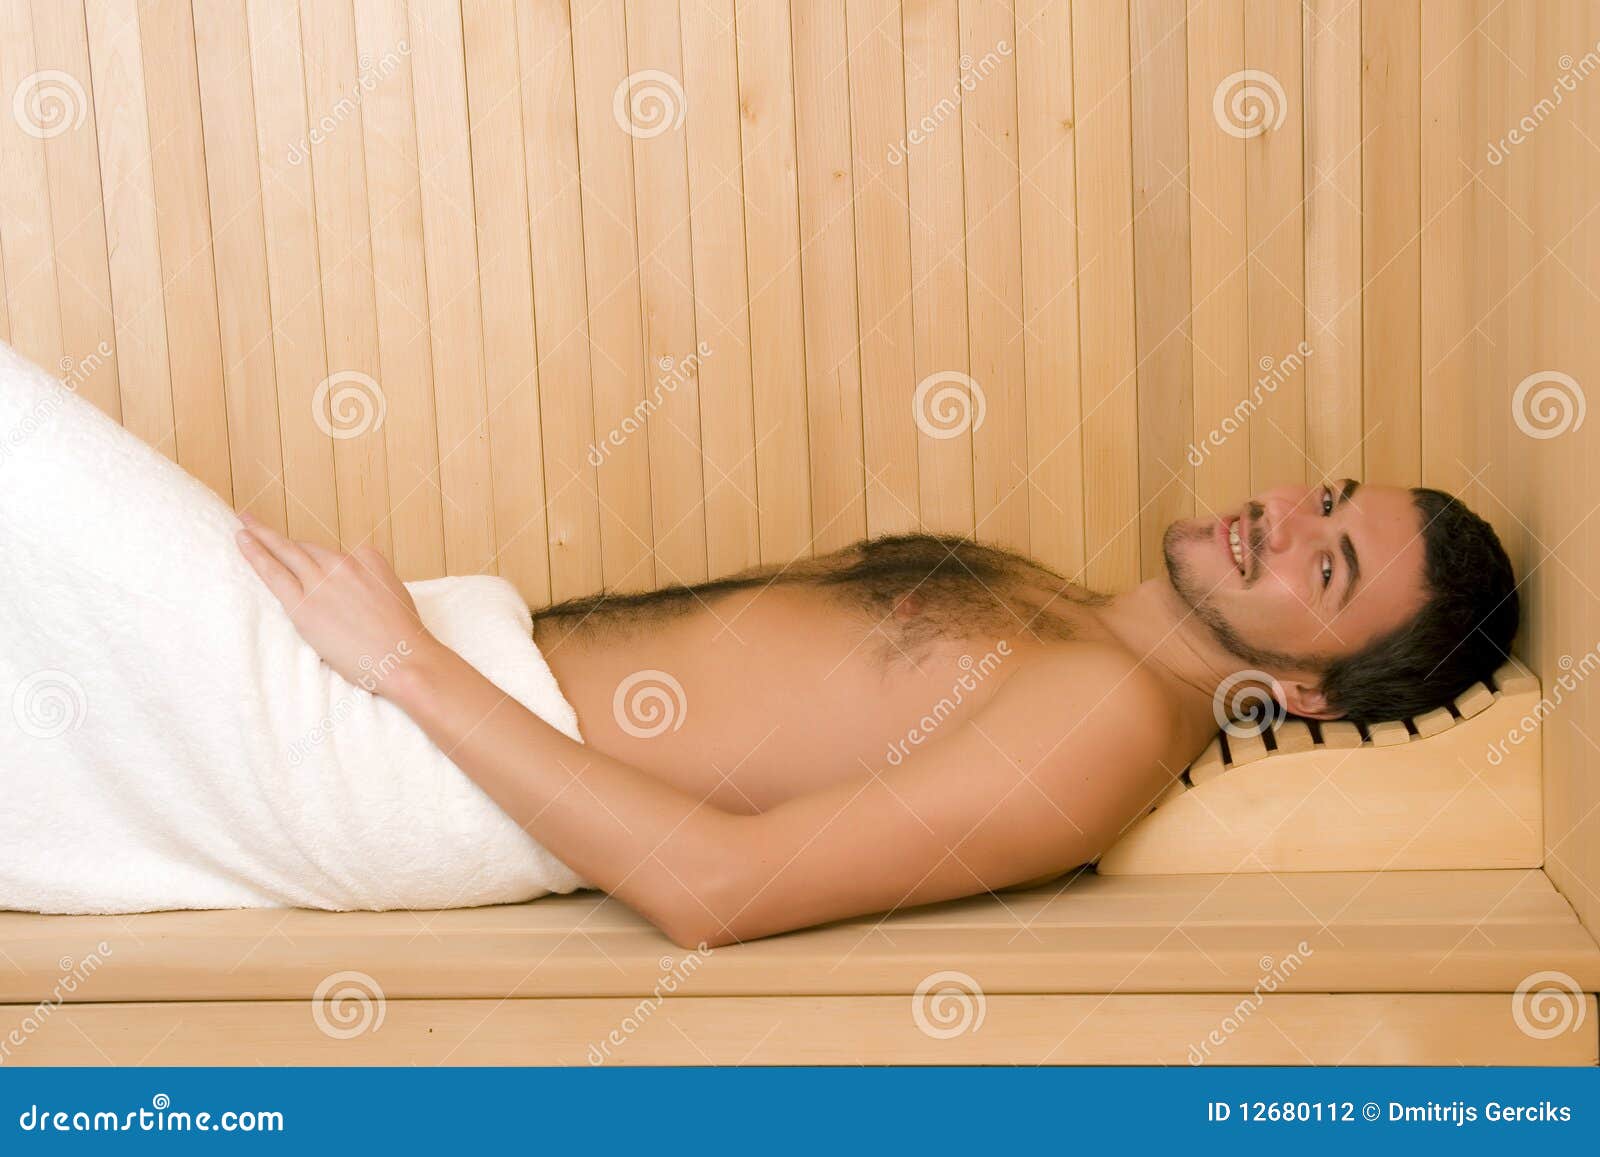 Handsome Man in a Towel Relaxing in Sauna Stock Photo - Image of perspire,  light: 12680112